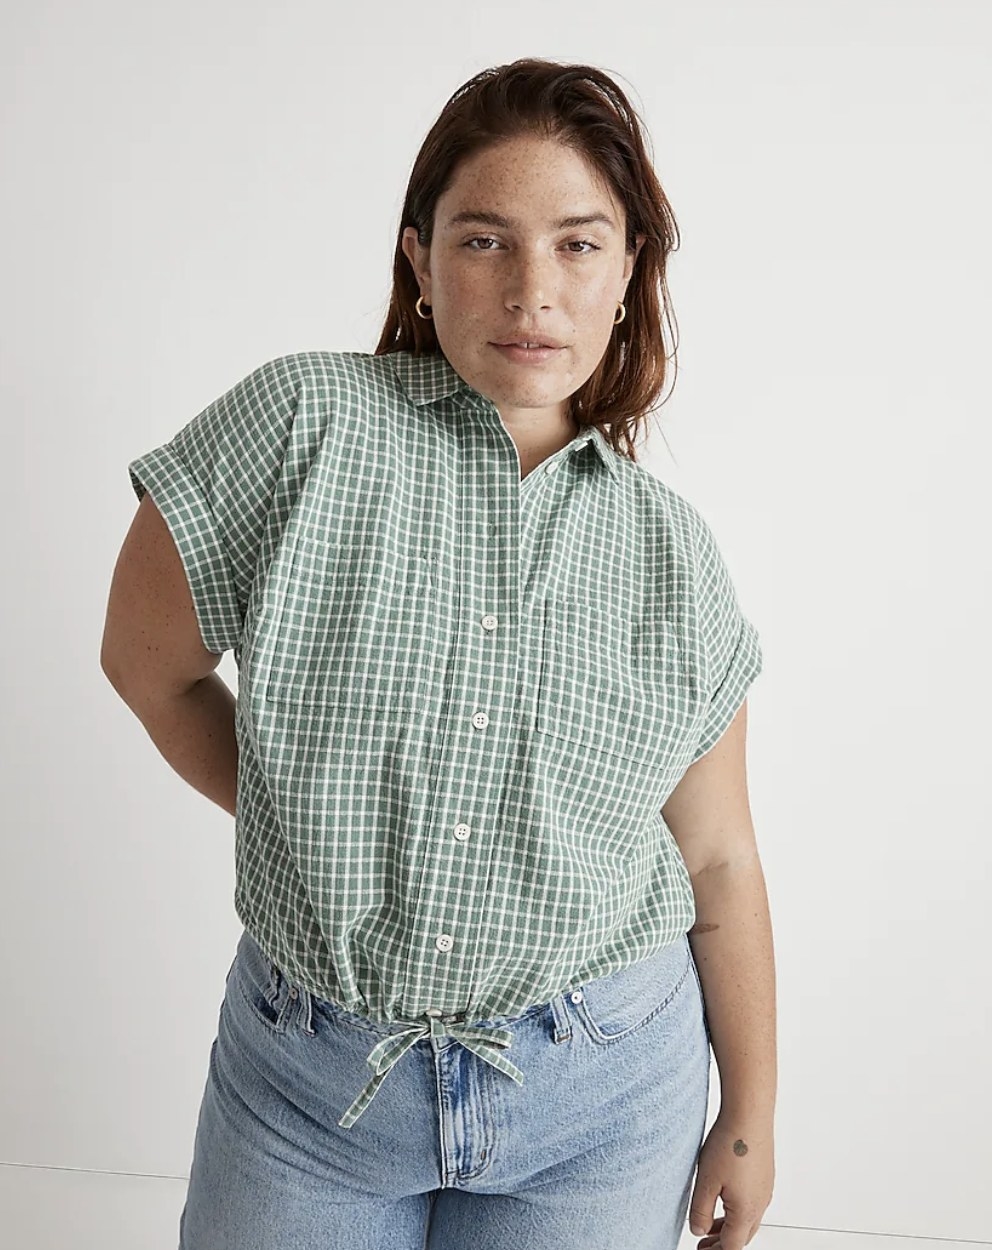 A person wearing a green and white plaid short sleeve shirt